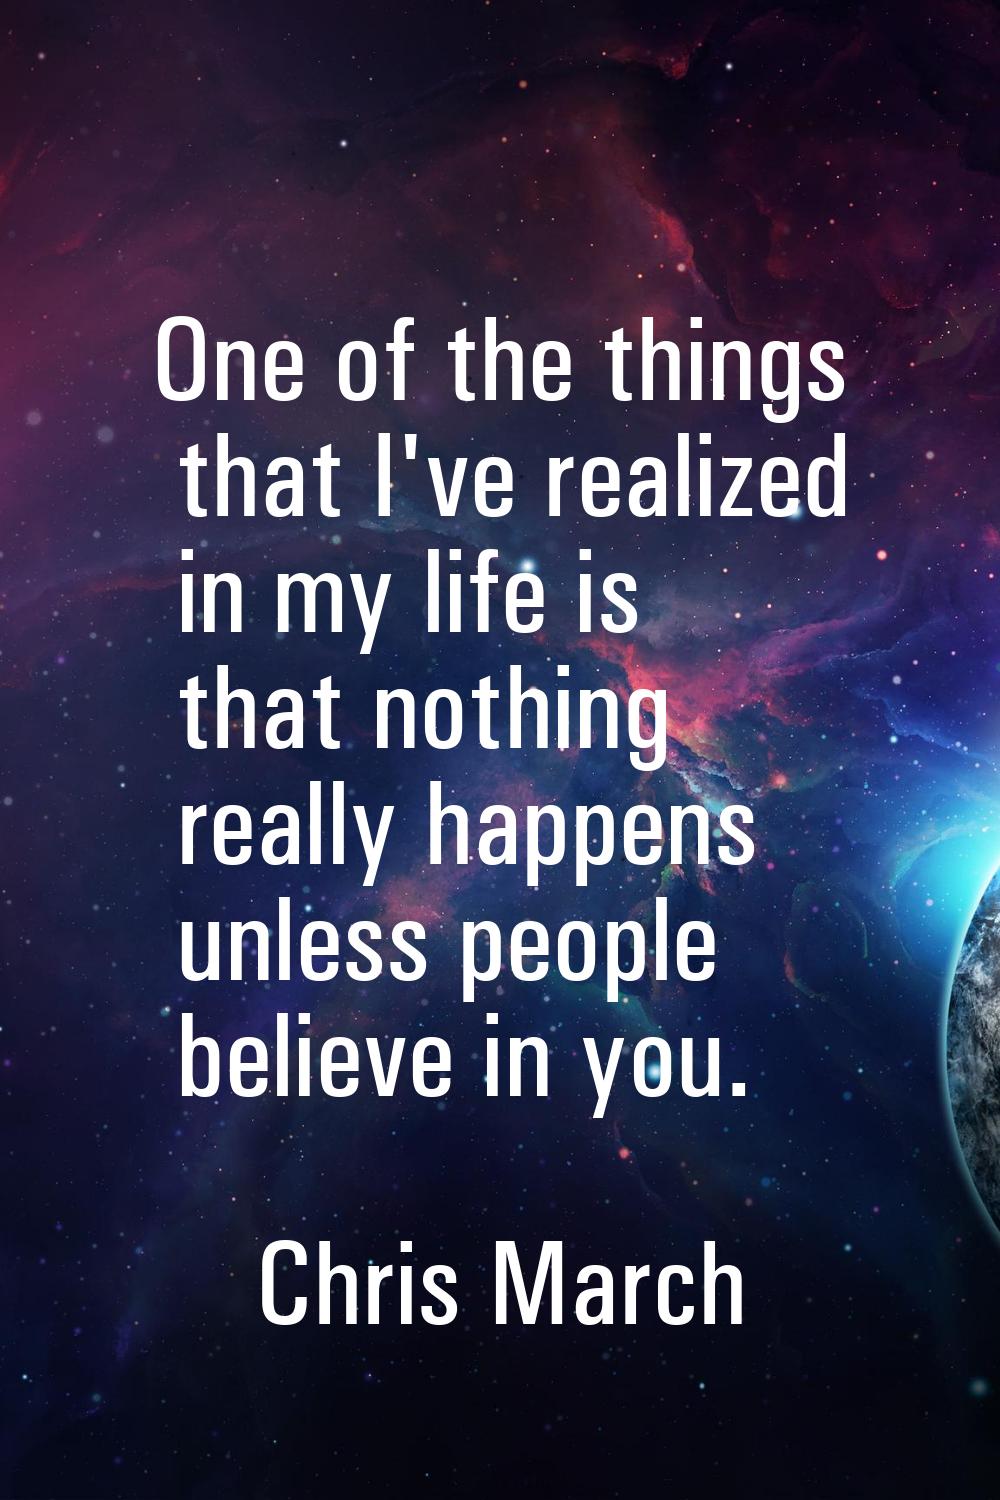 One of the things that I've realized in my life is that nothing really happens unless people believ